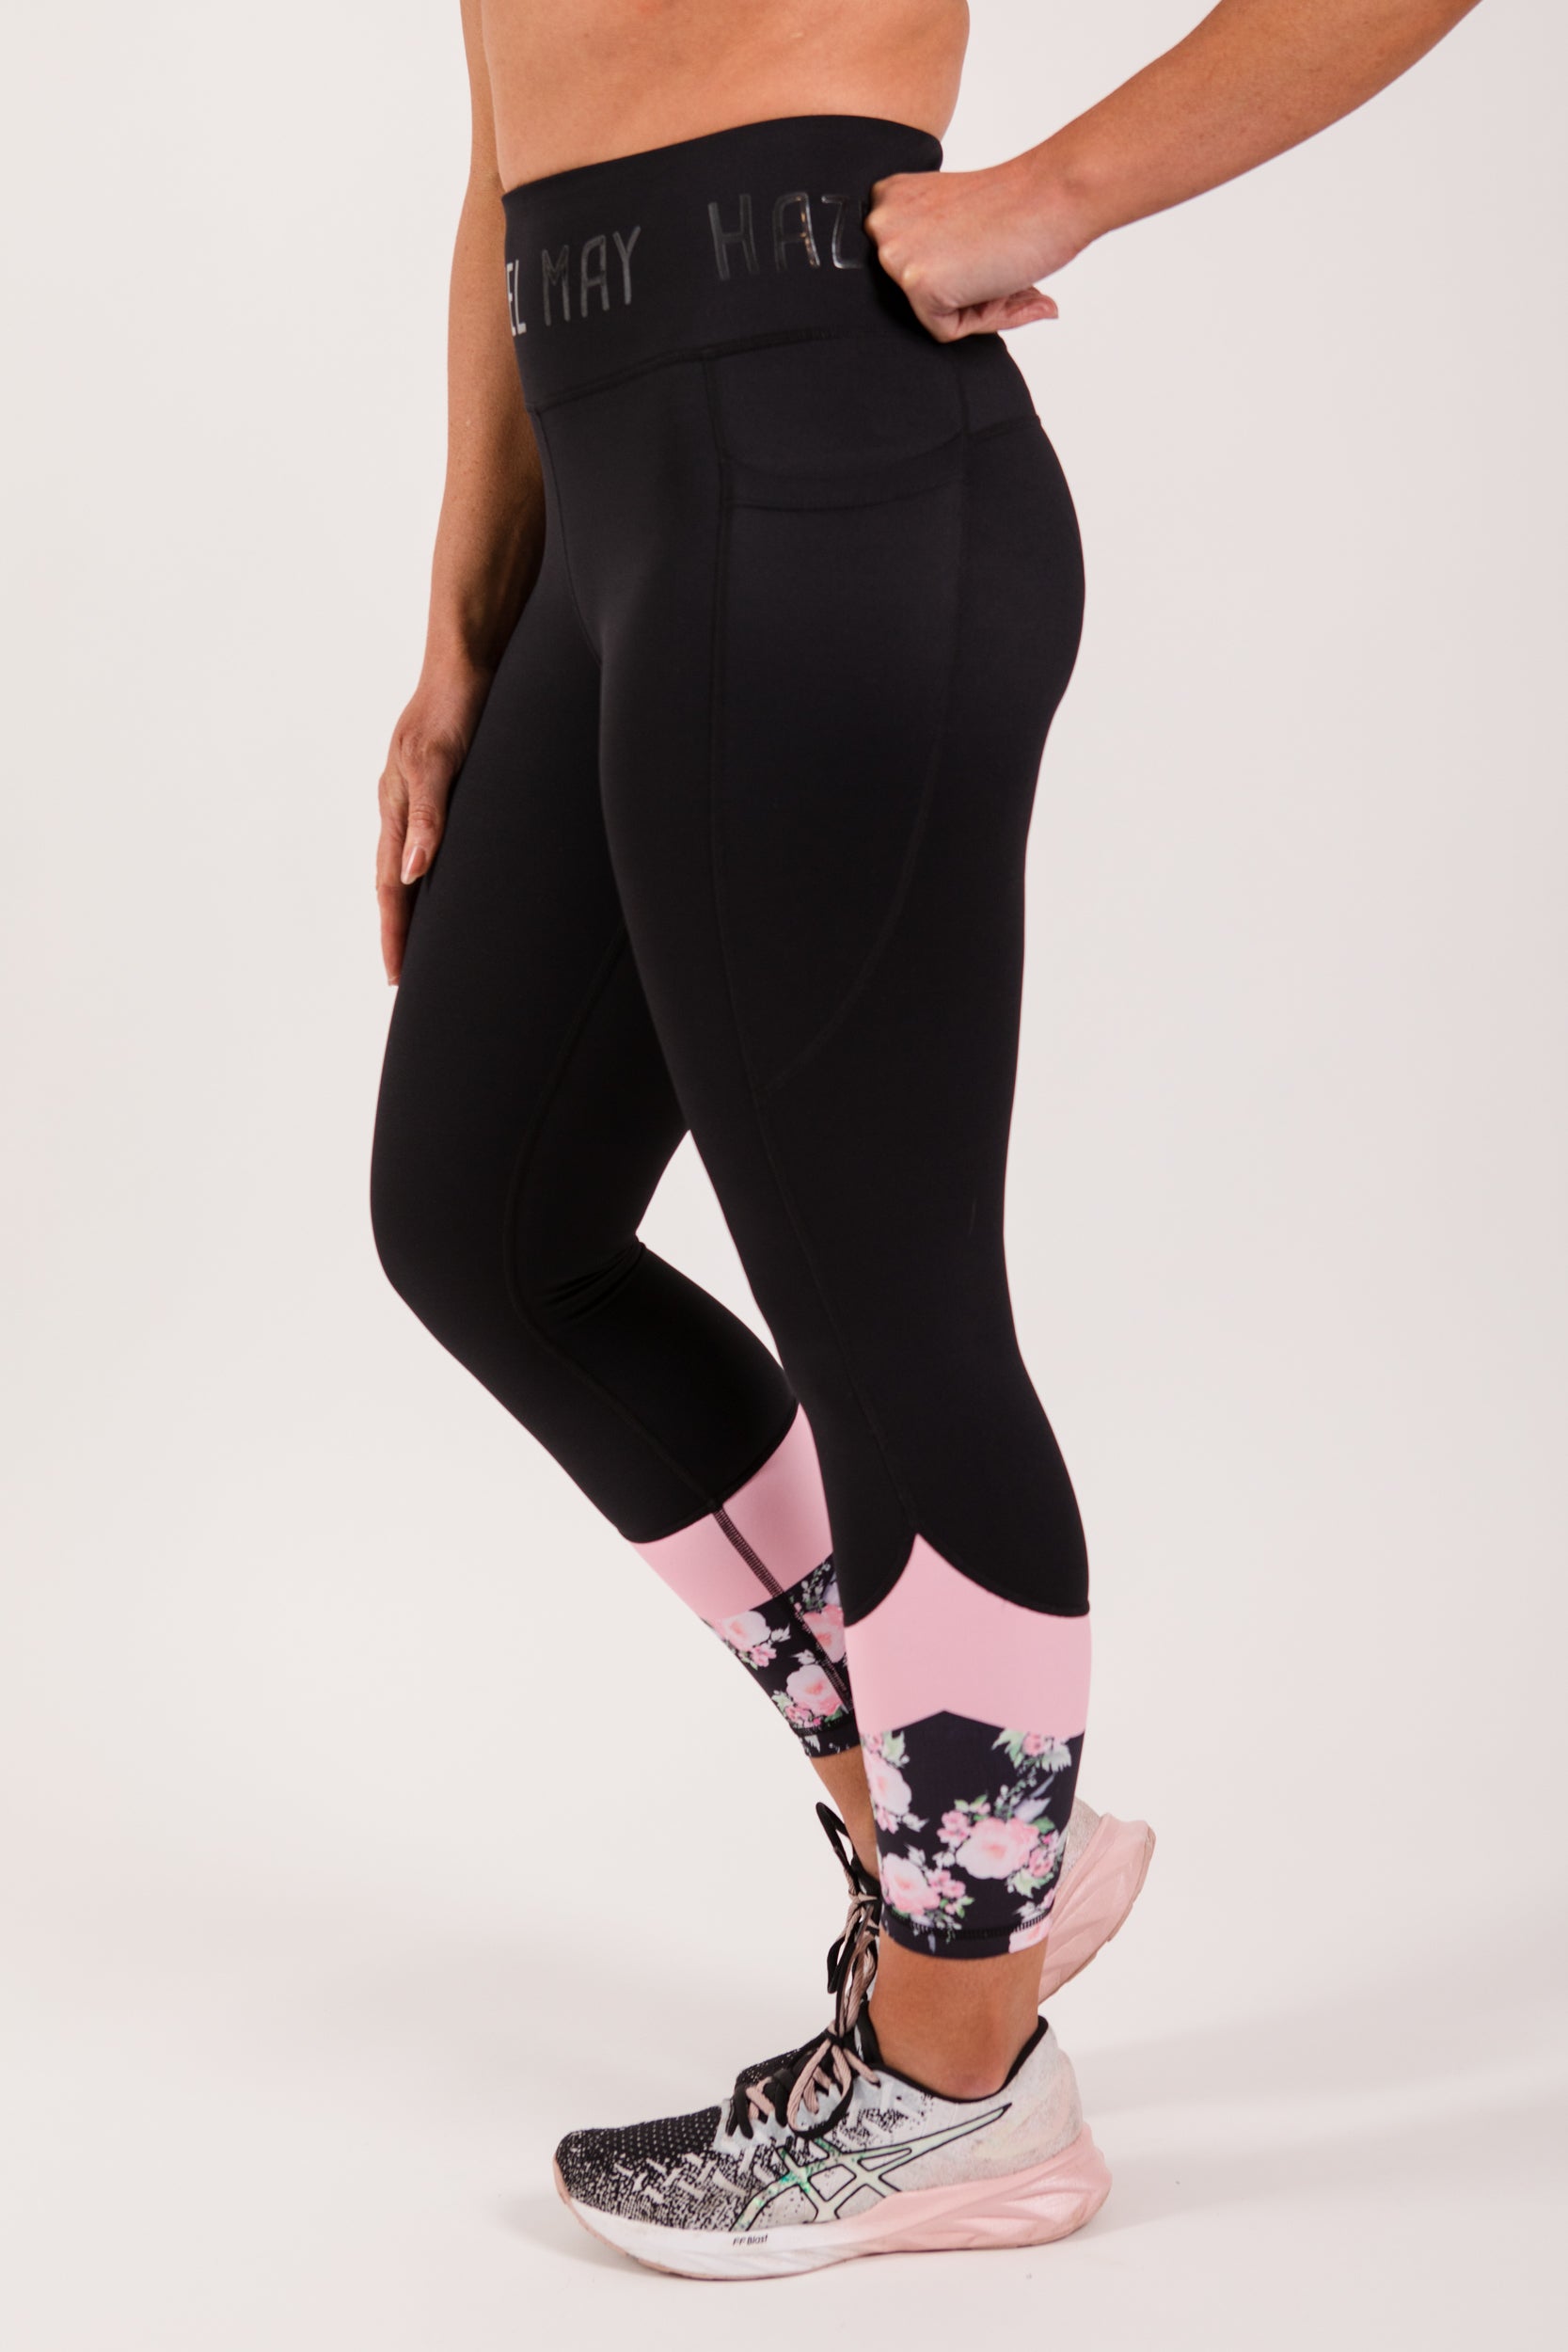 Freedom tight 7/8 - Black/ floral